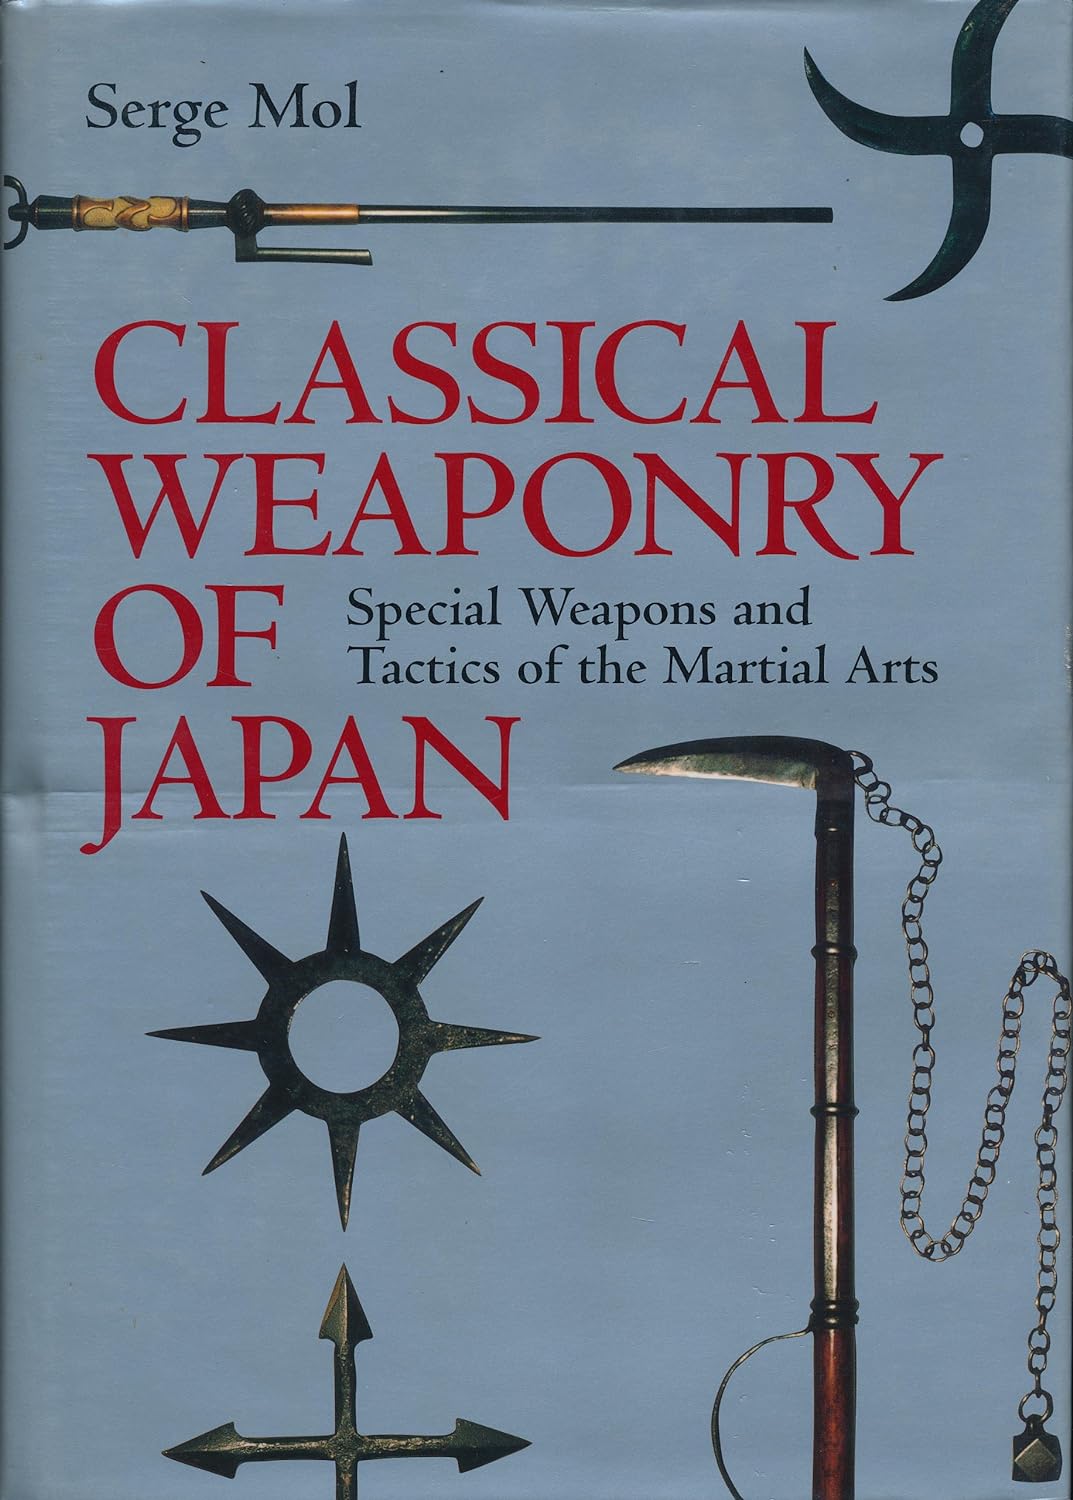 Classical Weaponry of Japan Book by Serge Mol (Hardcover)(Preowned)